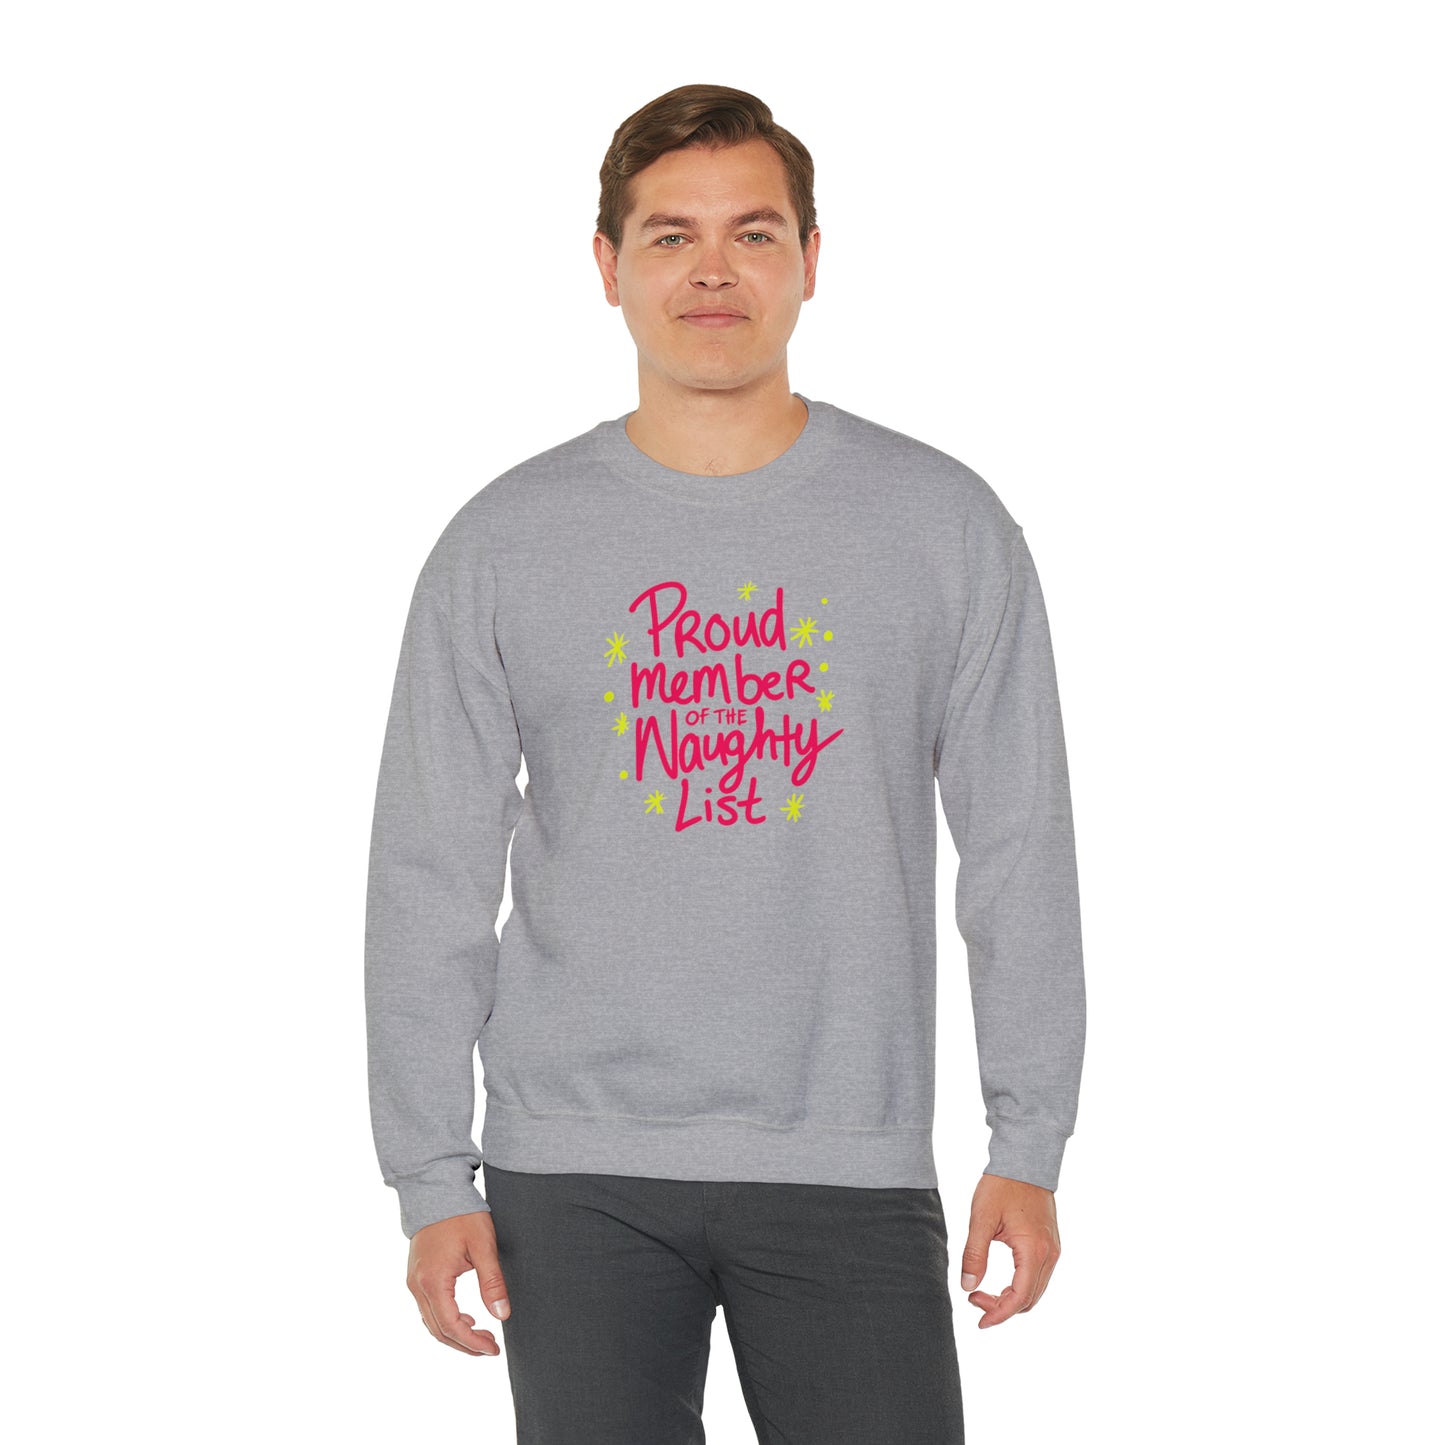 Proud Member of the Naughty List Christmas Sweatshirt | Matching Christmas Jumpers For Men, Women, Families | Xmas Gift